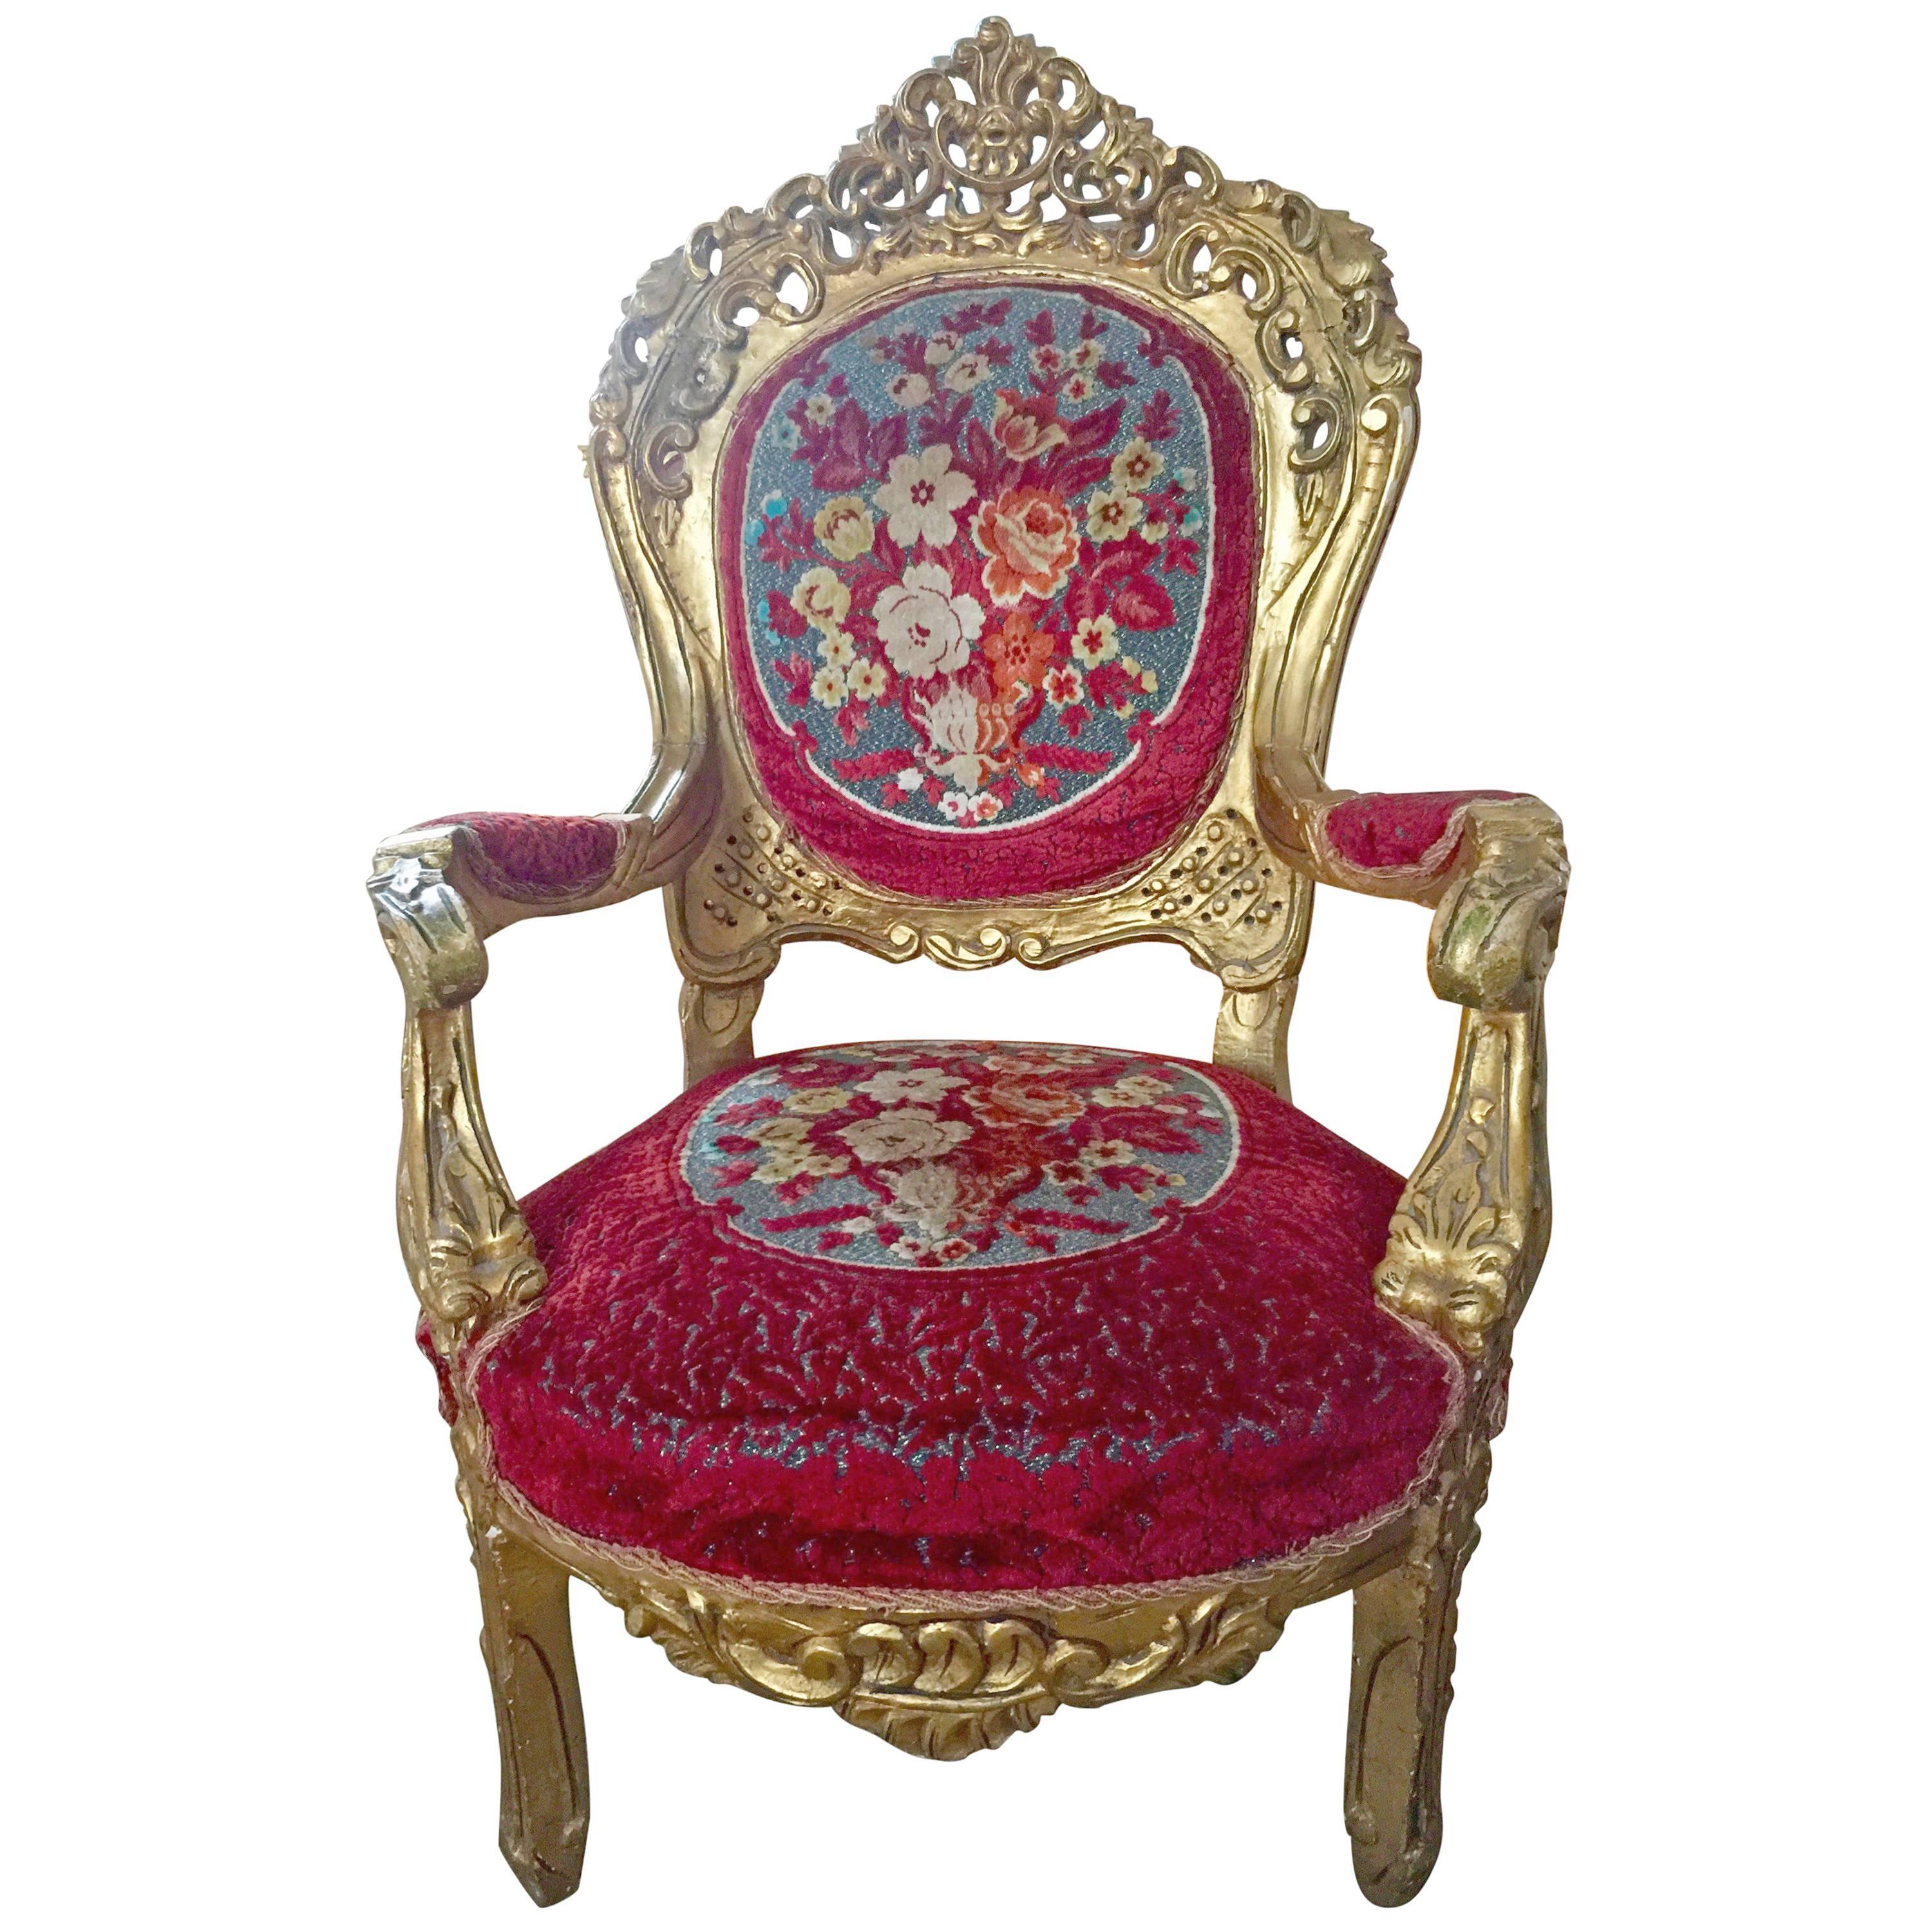 Original French 18th Century Hand Carved Giltwood Rococo Armchair For Sale